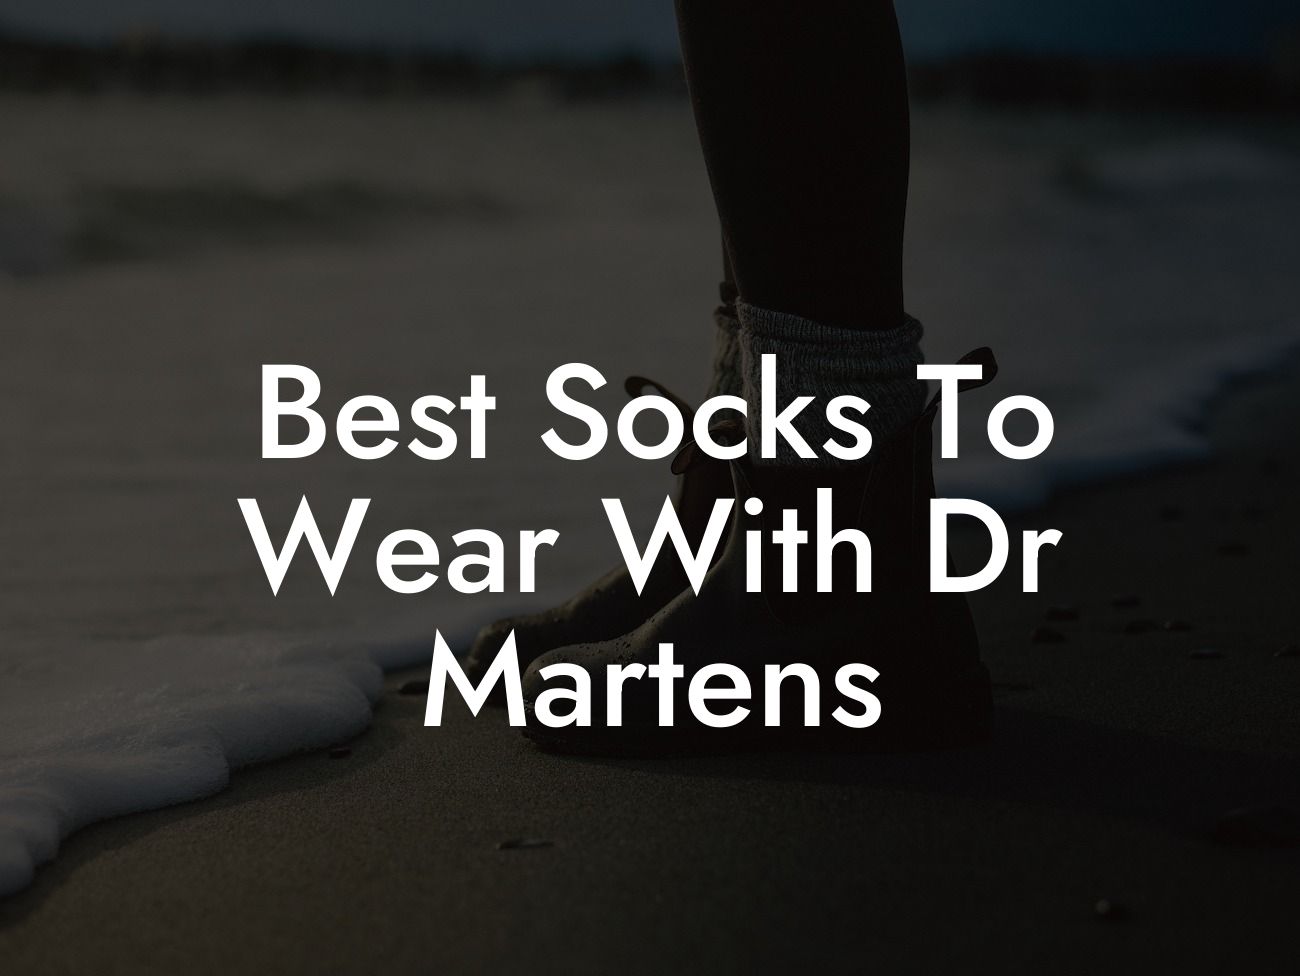 Best Socks To Wear With Dr Martens